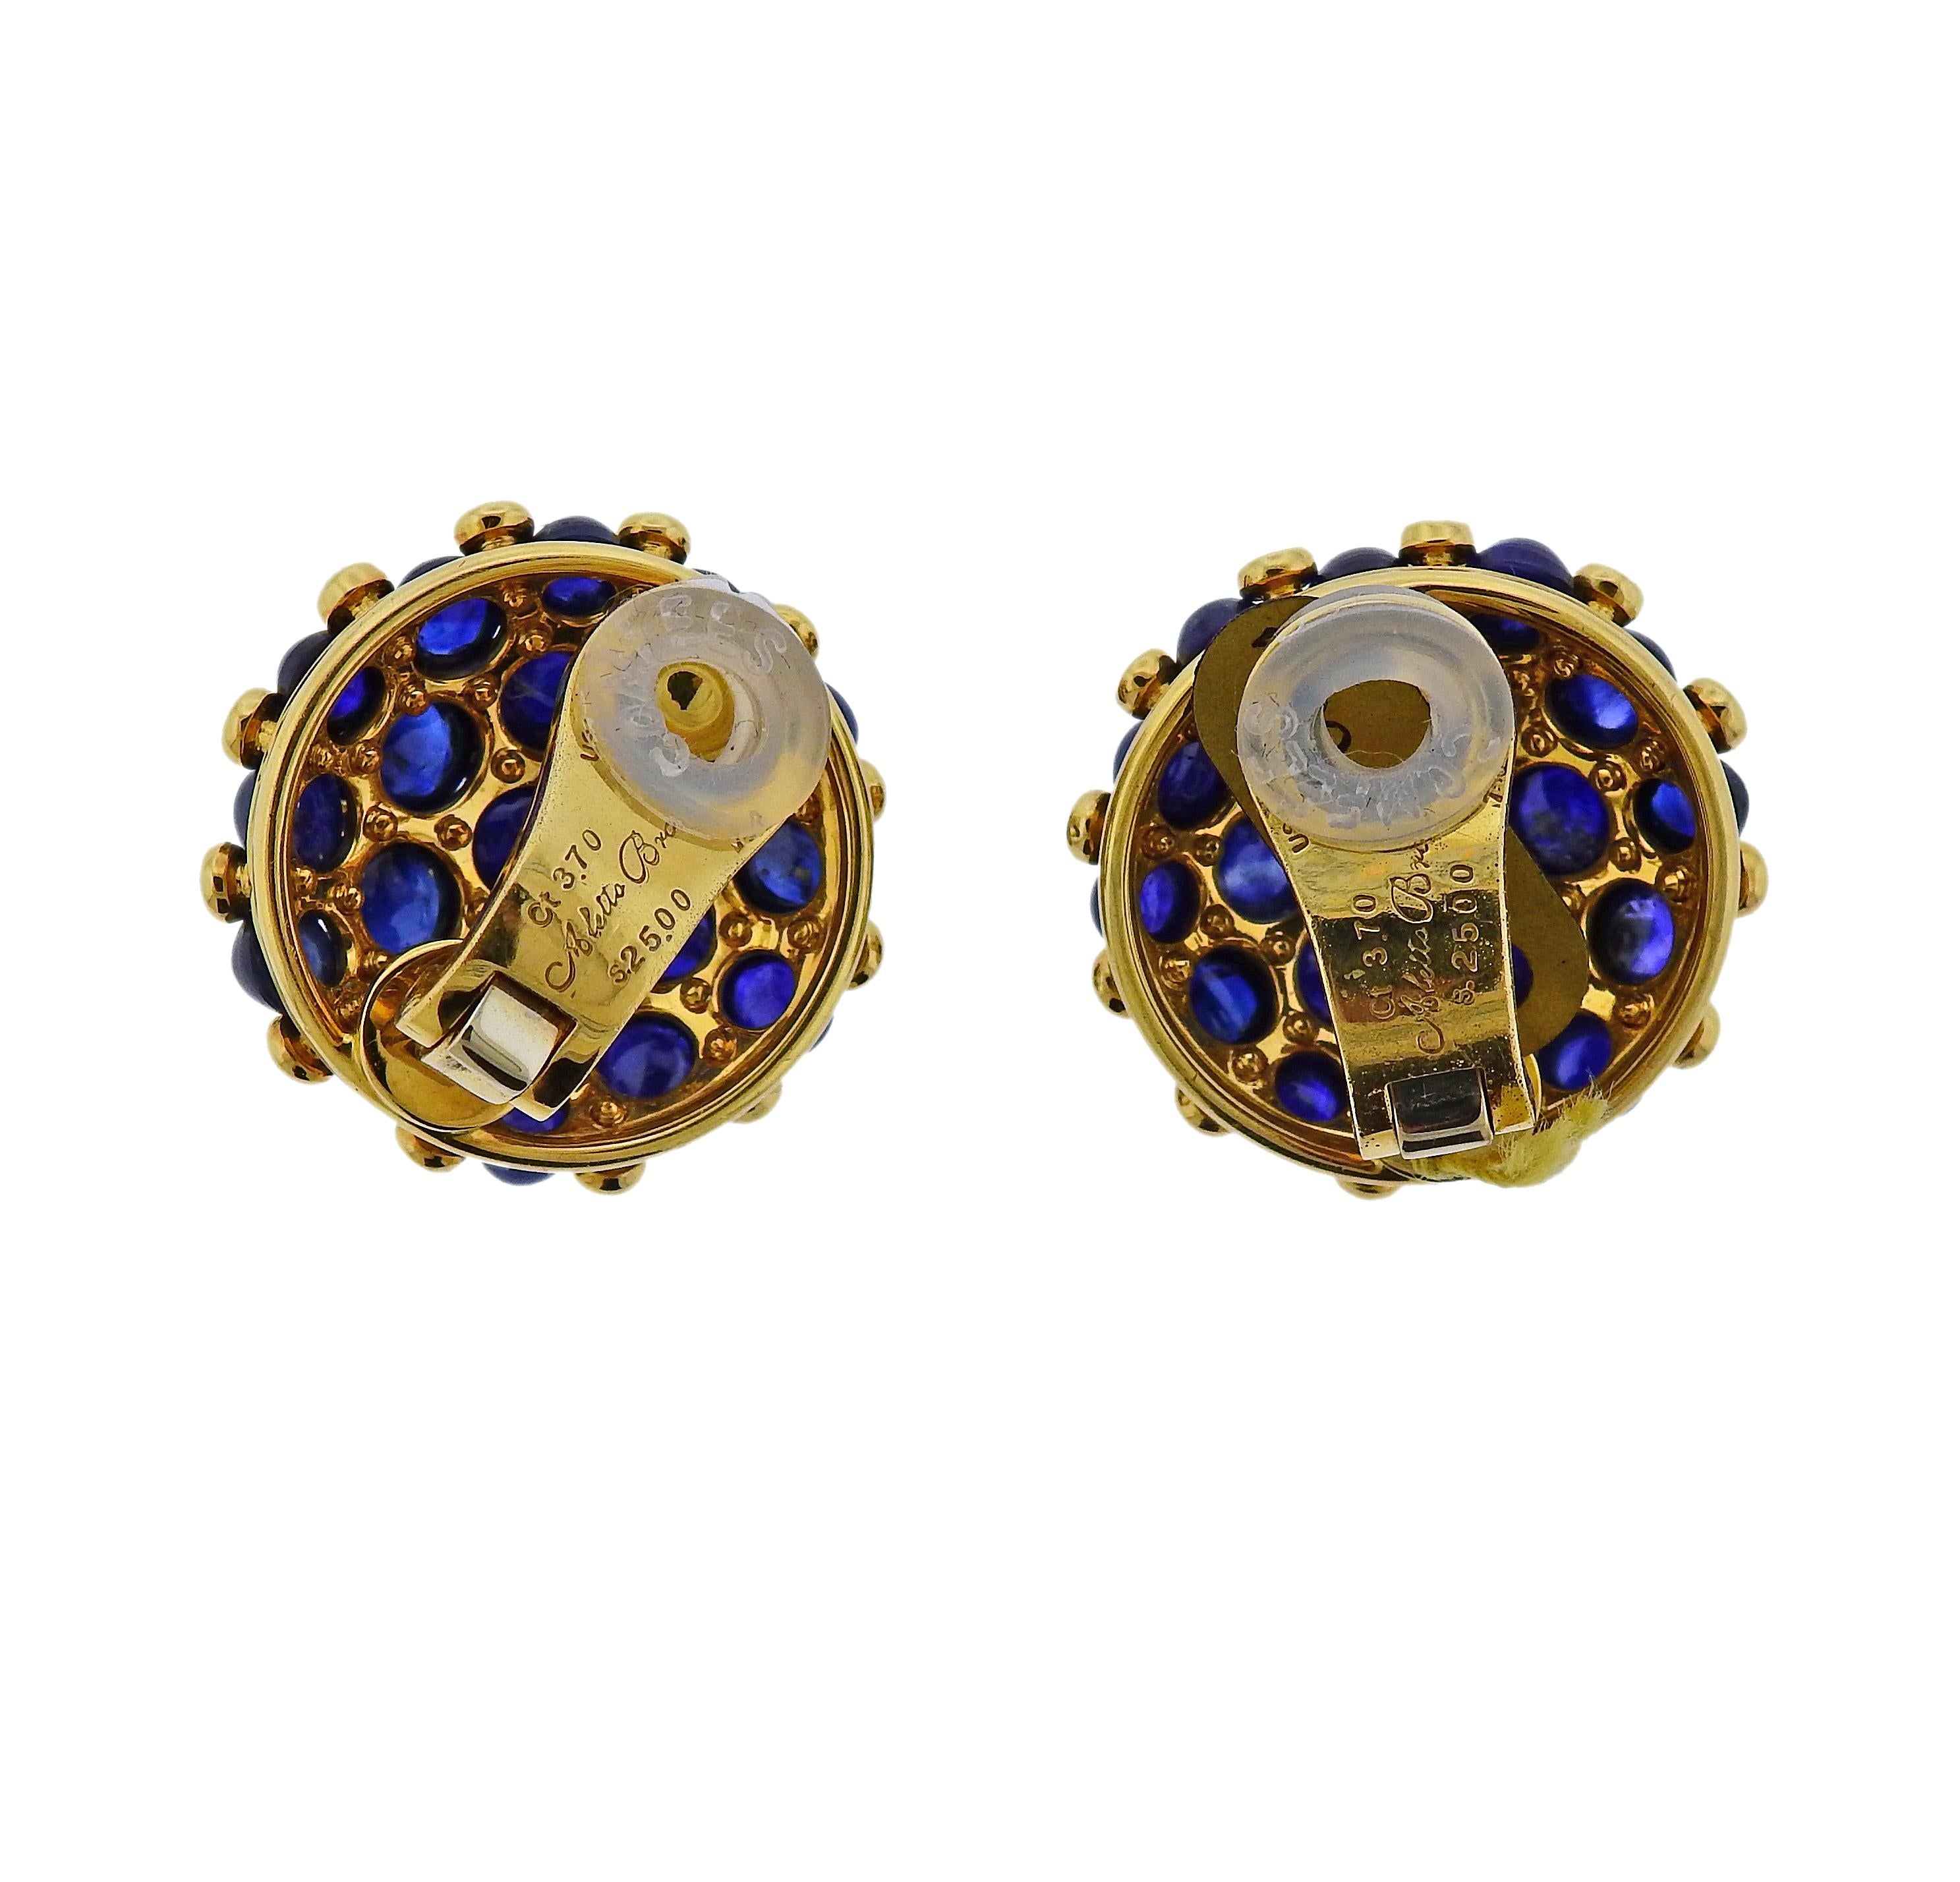 Pair of new 18k yellow gold earrings by Aletto Brothers, featuring 25 carats in blue sapphire cabochons, and 3.70ctw in VVS/VS-G diamonds. Earrings are 24mm in diameter.  Weigh 29.1 grams. Marked: USA,750, Ct.3.70,S 25.00, Aletto Bros.